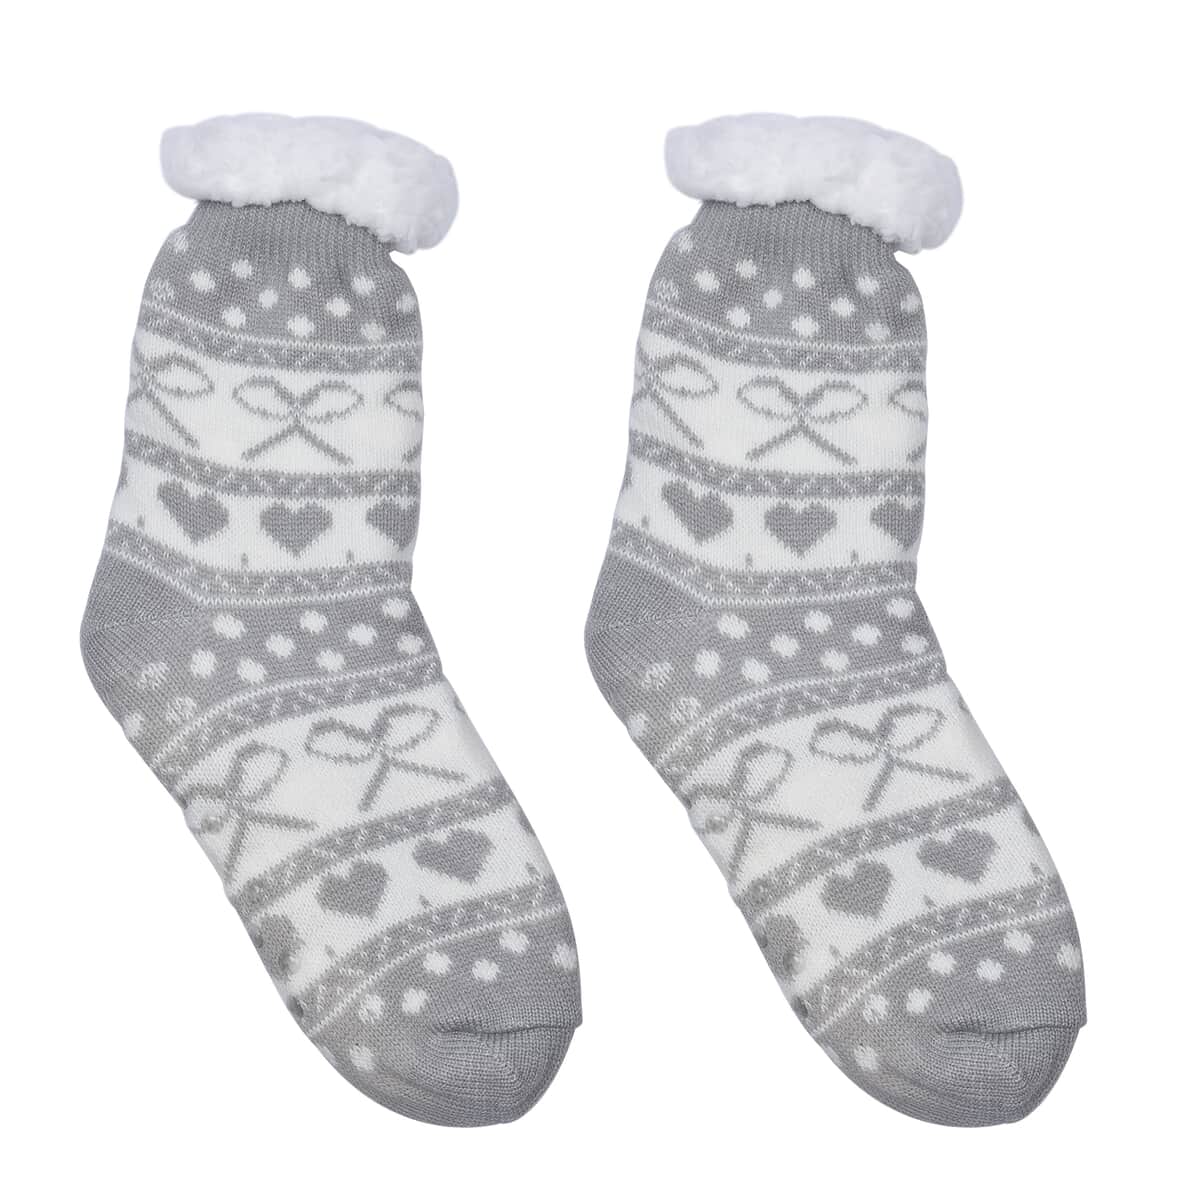 Homesmart Set of 2 Pairs Warm & Fuzzy Gray and Brown Bowknot and Heart Pattern Sherpa Lined Slipper Socks (Women's Size 5-10) with Anti Slip Rubber image number 3